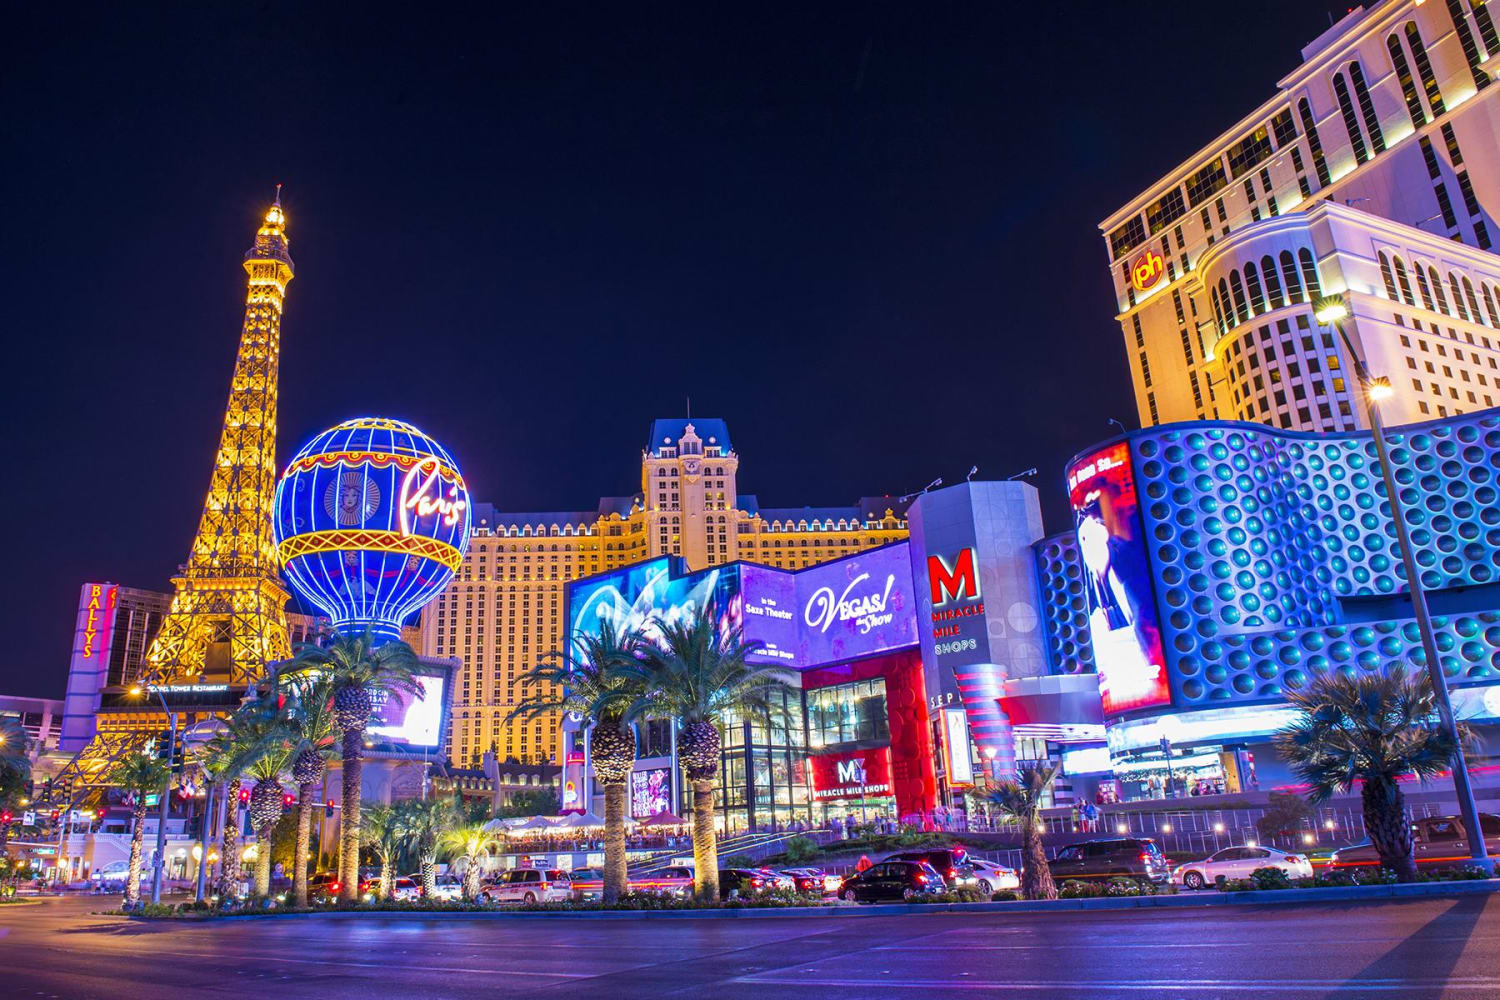 48 Hours Under $48: How to See Las Vegas on a Shoestring